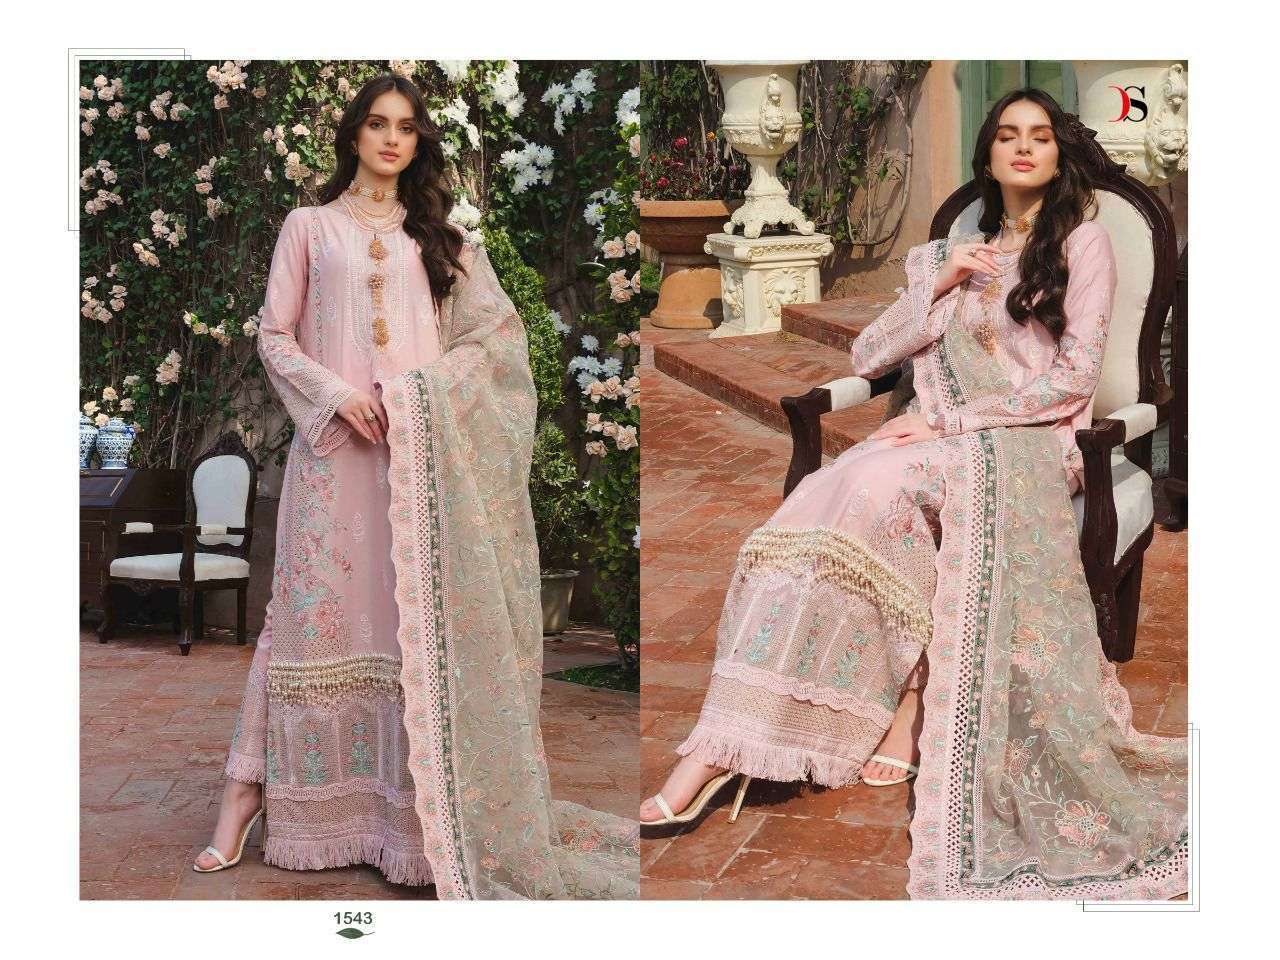 DEEPSY SUITS PRESENTS MARYUM N MARIA VOL 22 COTTON EMBROIDERY WHOLESALE PAKISTANI SUIT